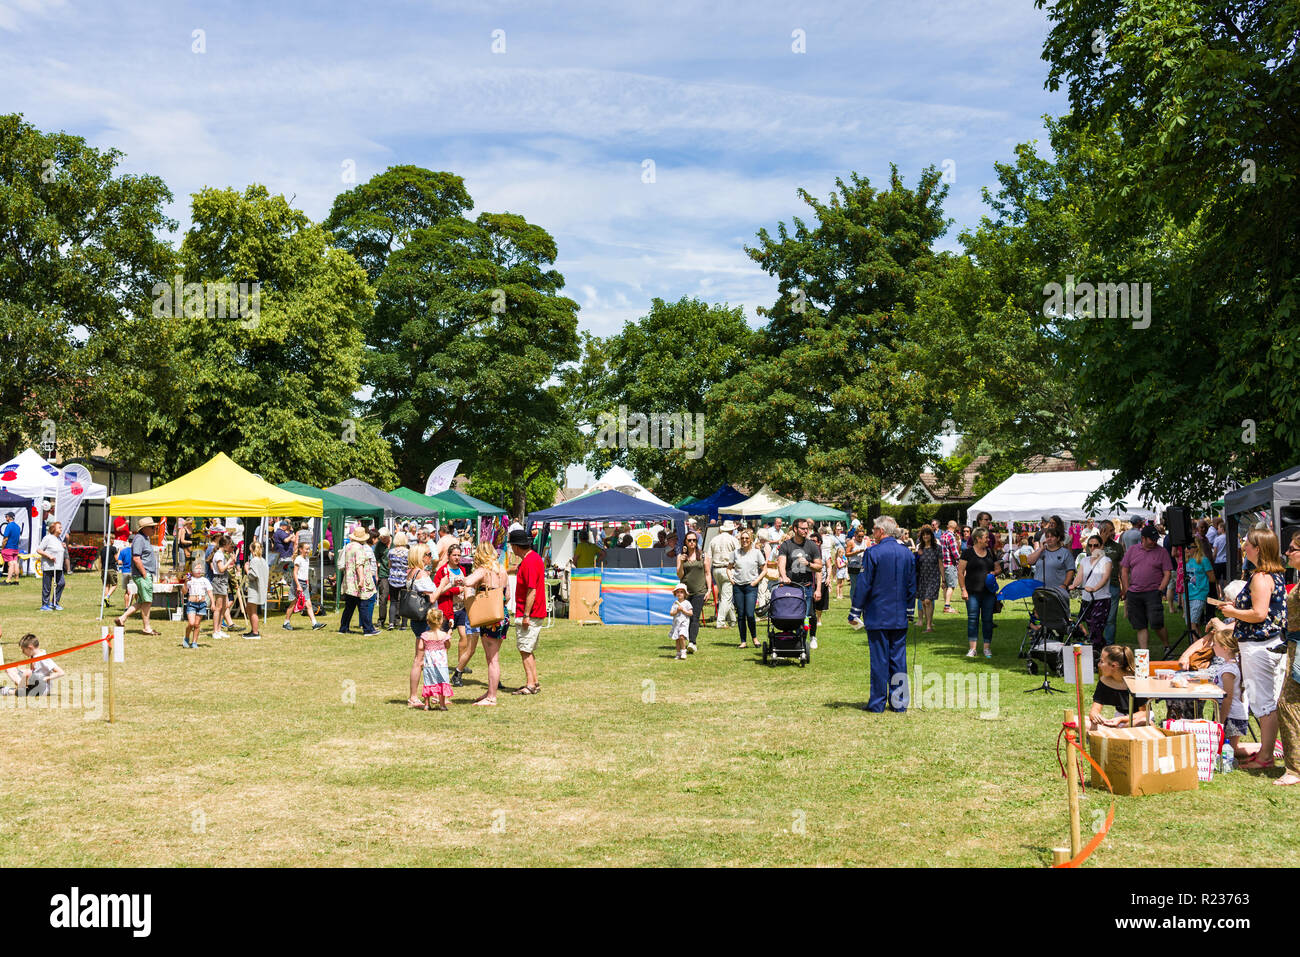 A crowd of people at a Summer fete in a field on a sunny Summer day, Brampton, UK Stock Photo